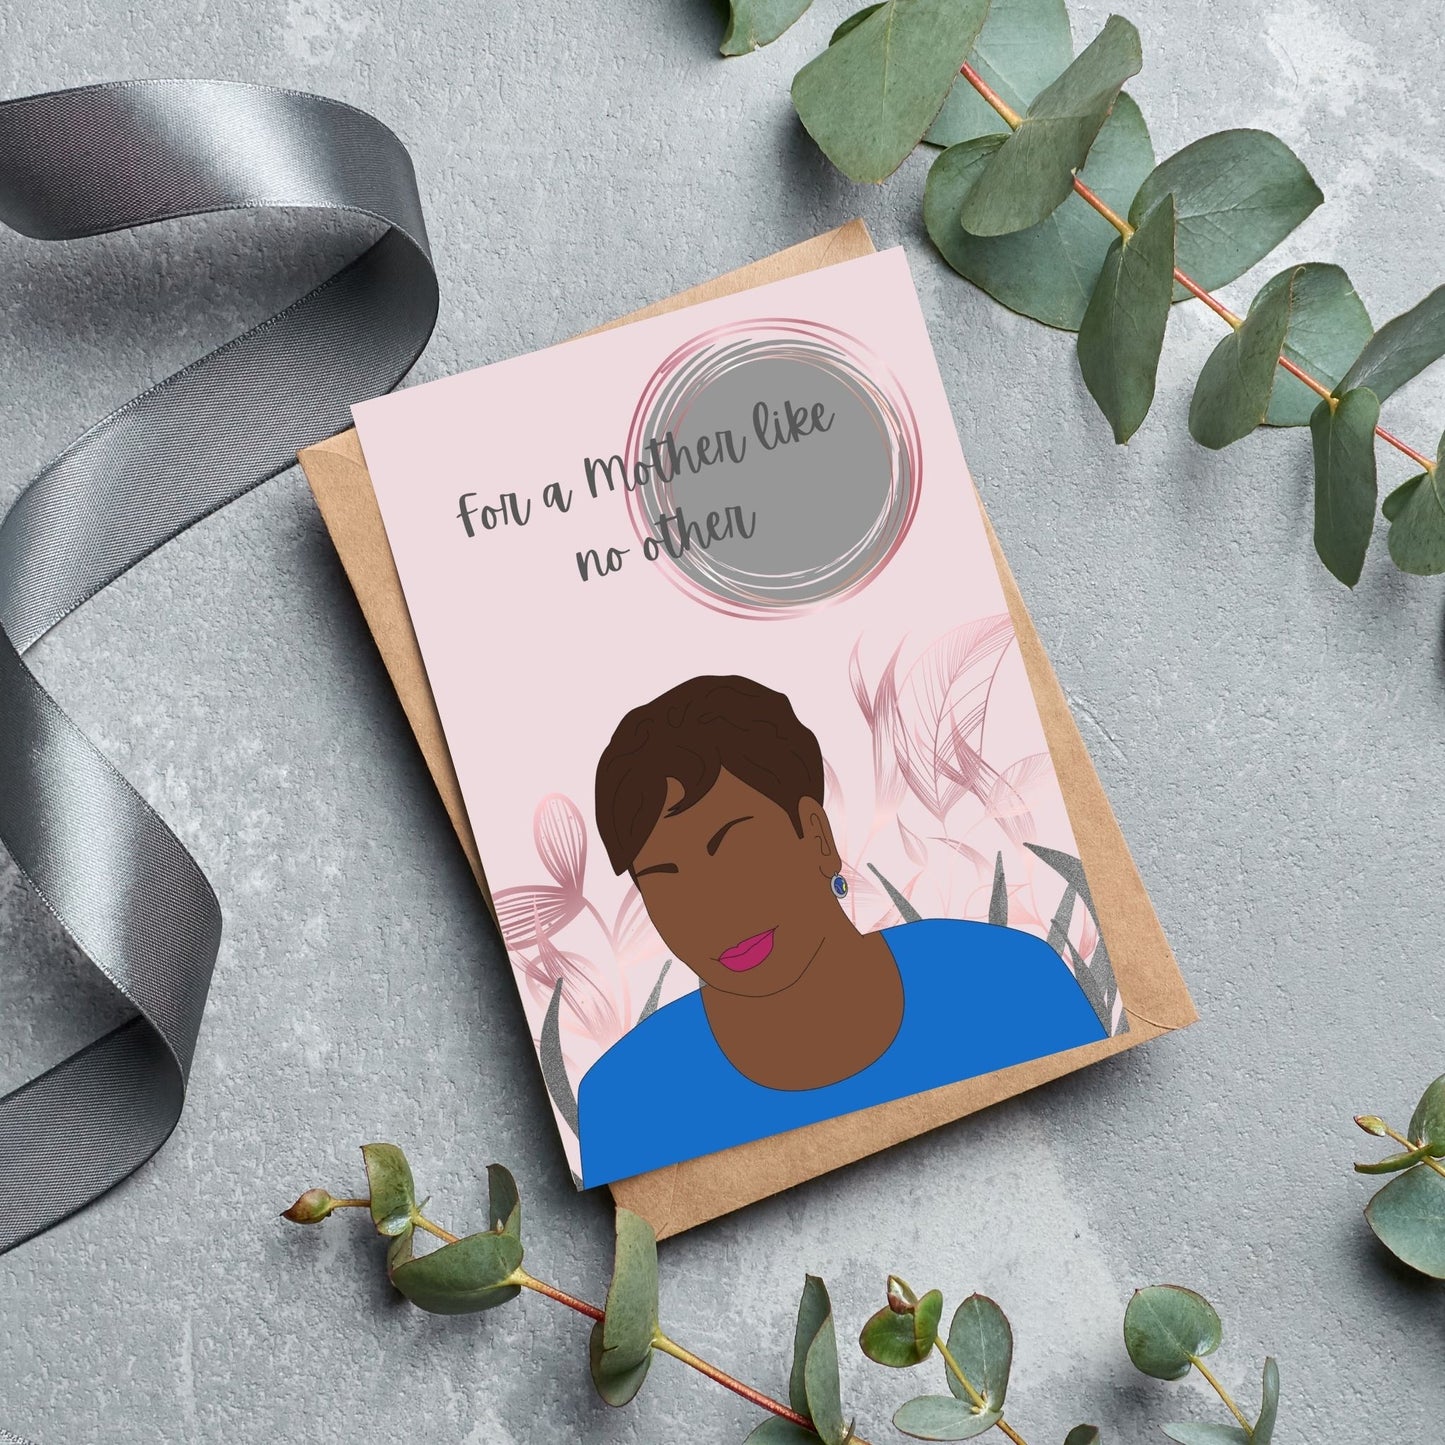 For a Mother Like No Other Greeting Card